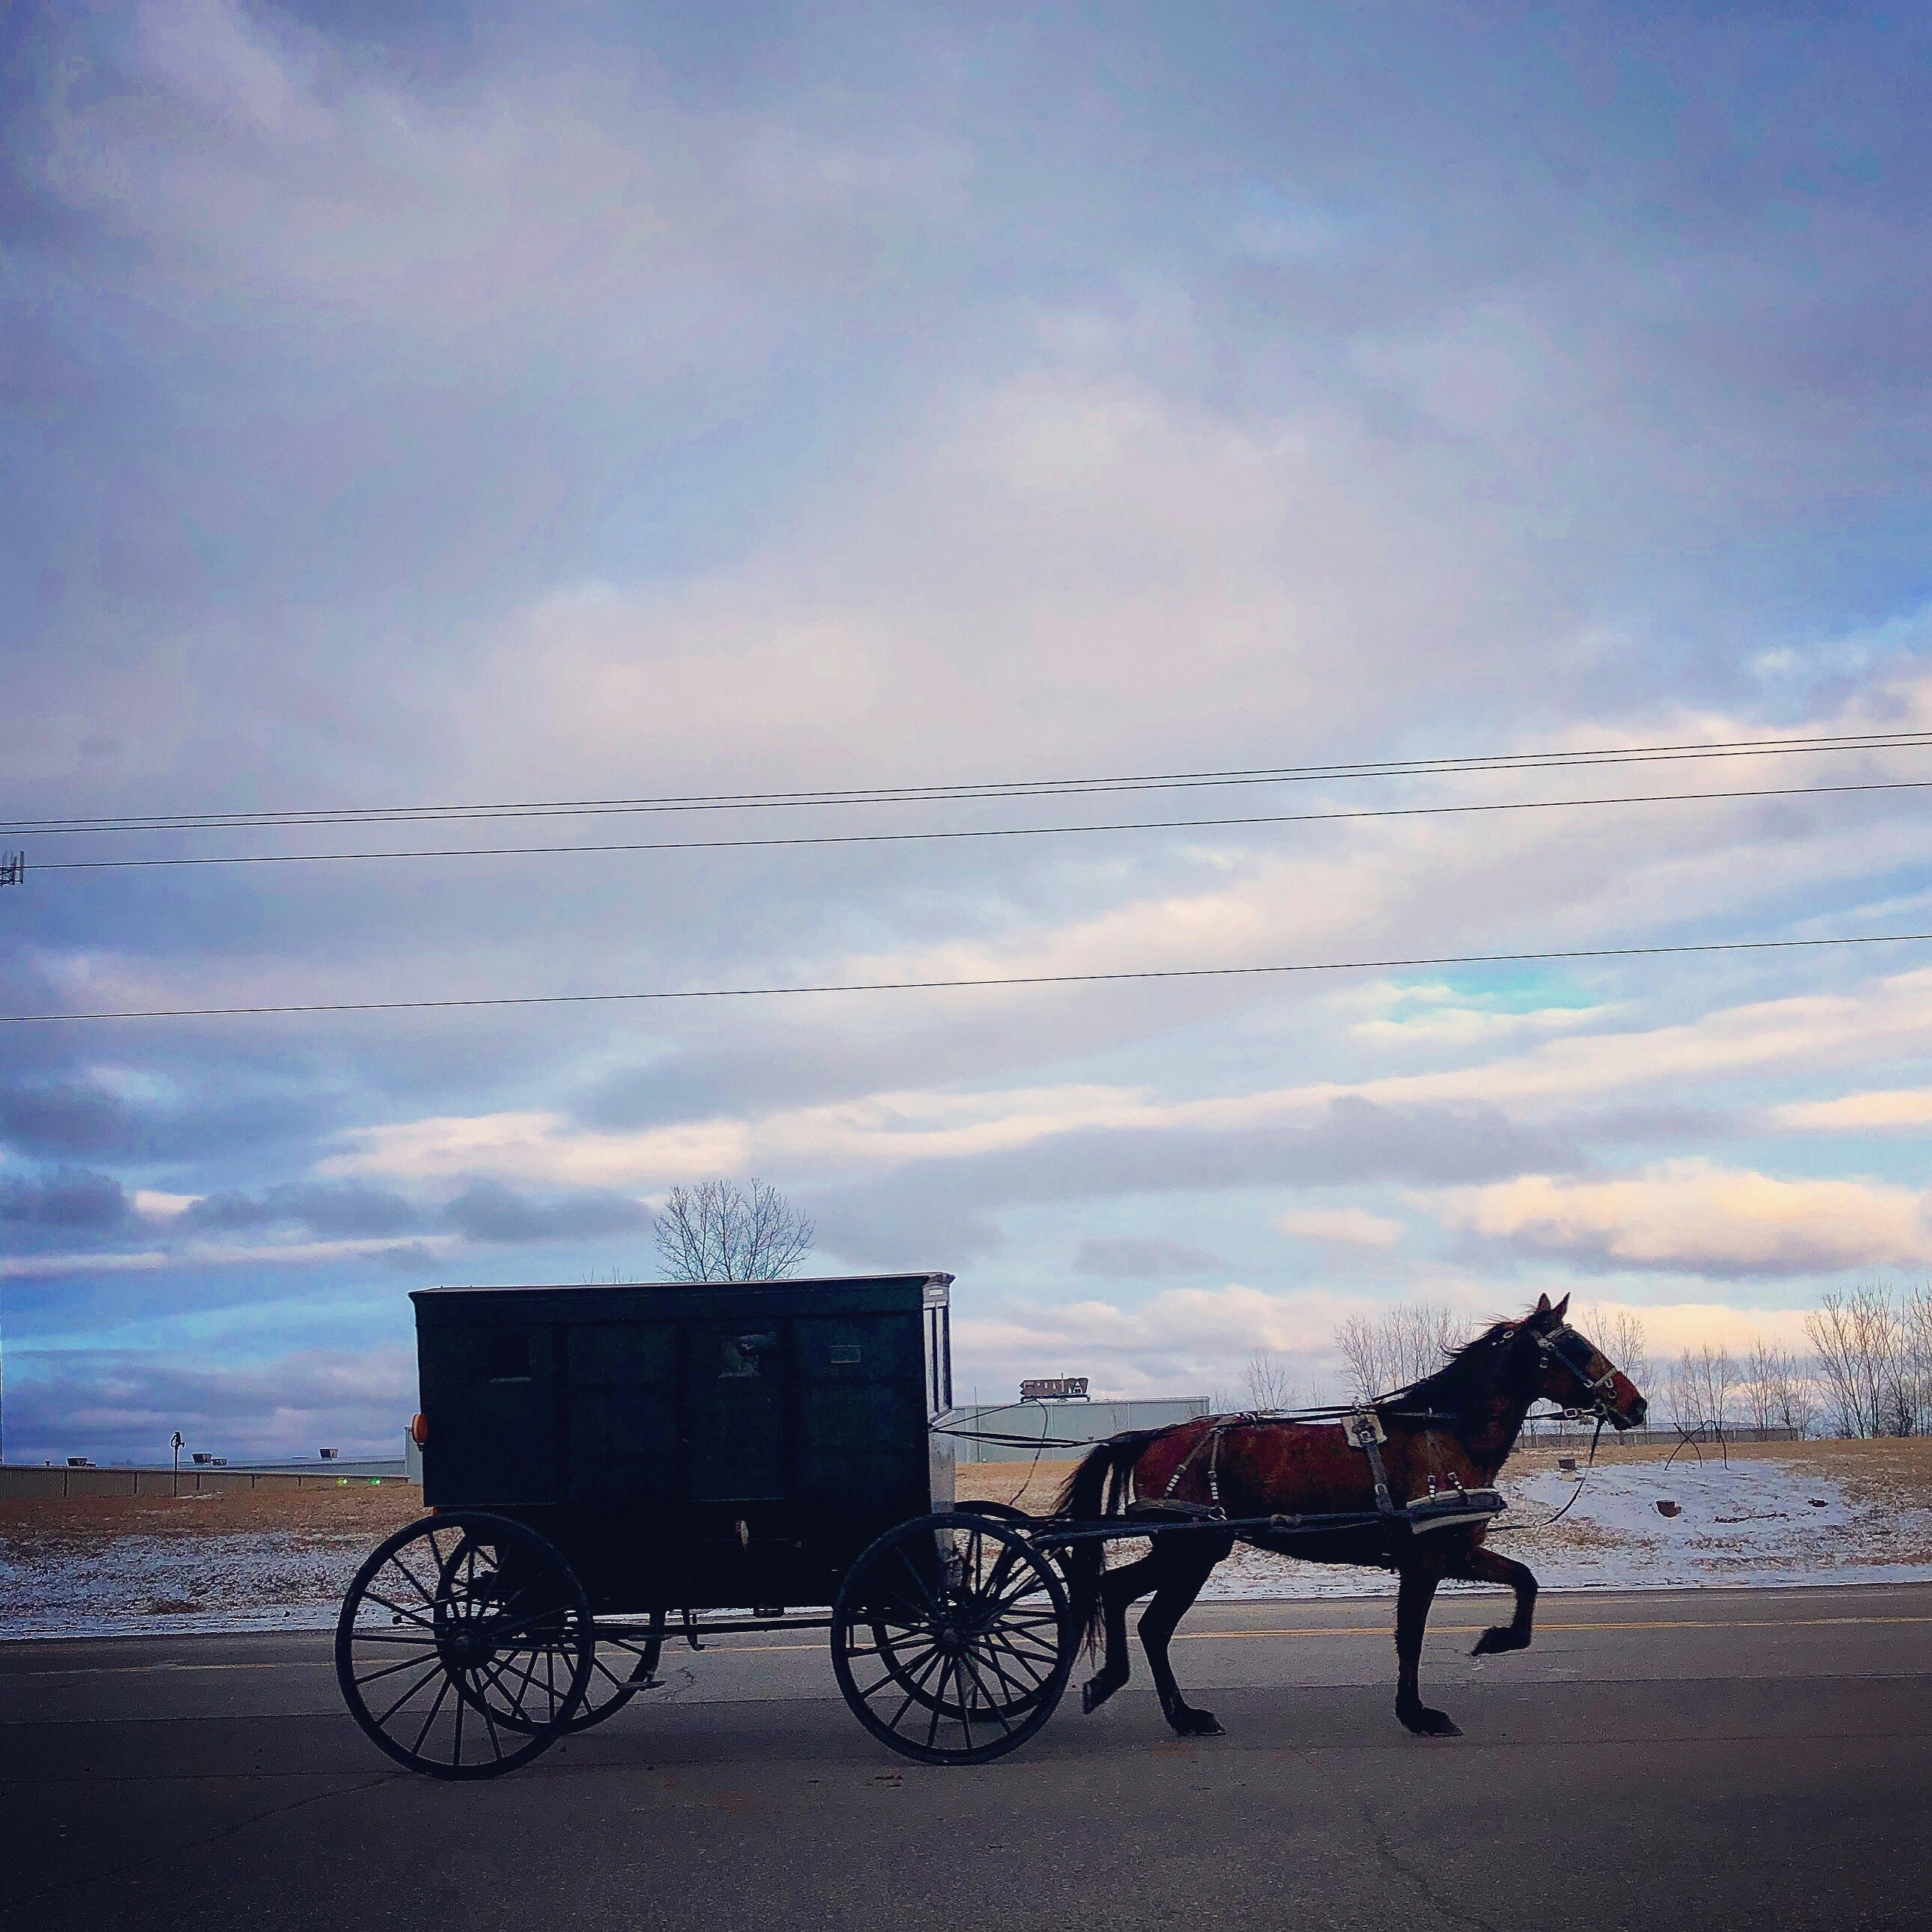 A horse-drawn buggy in Amish Country